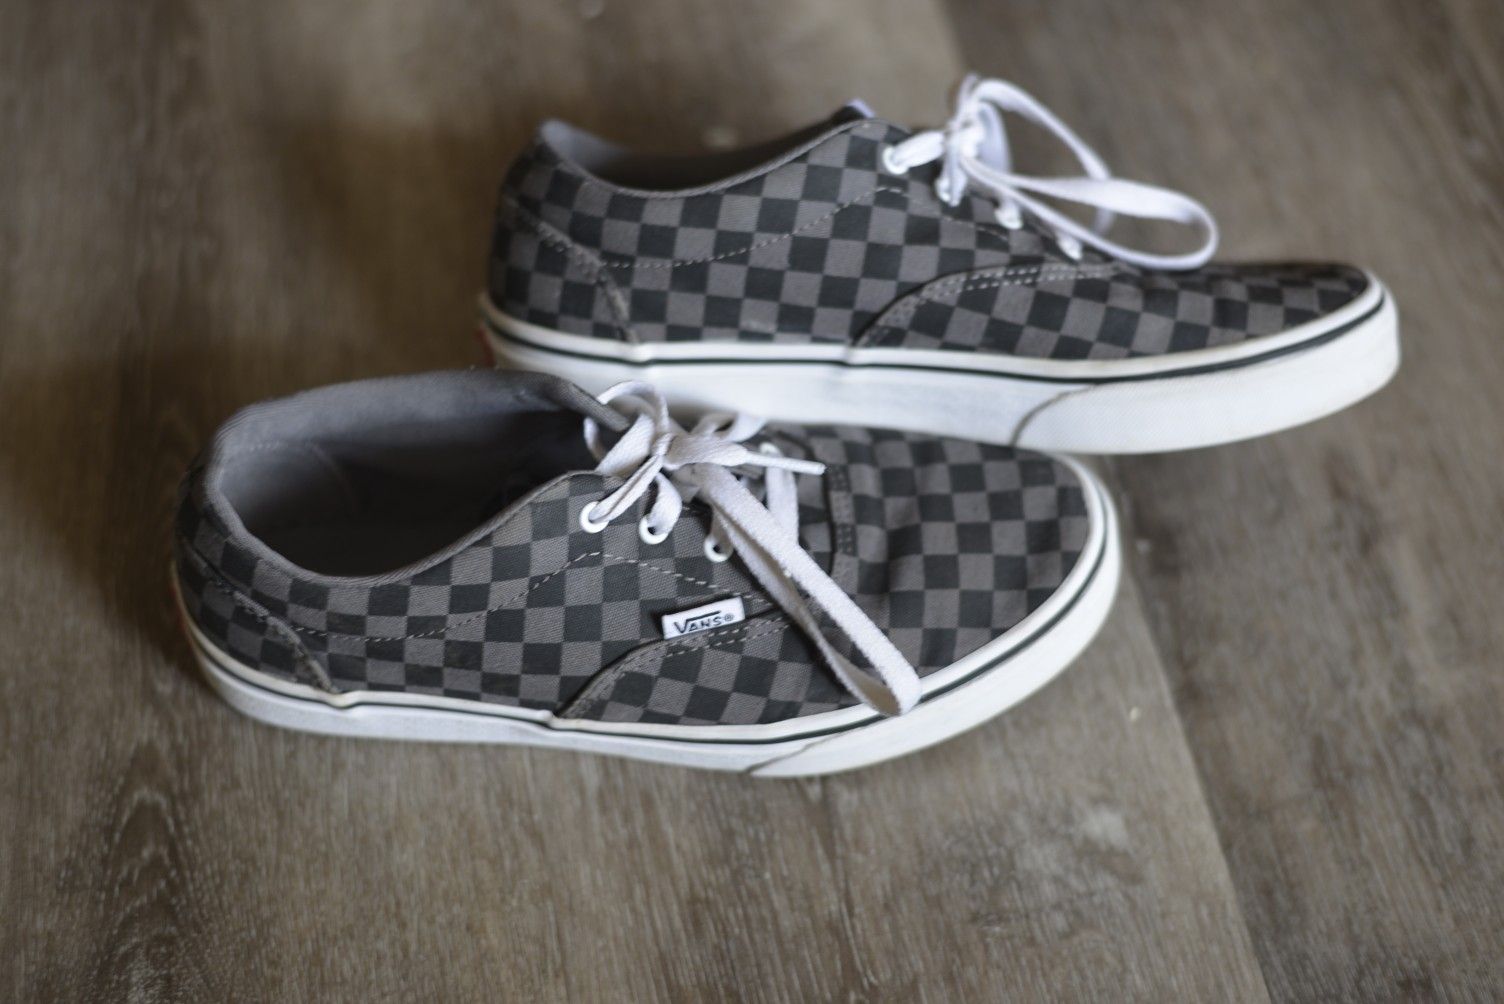 Vans - size 6 Youth - black/ gray checkered - Laces - Old School Classic - style# 721356